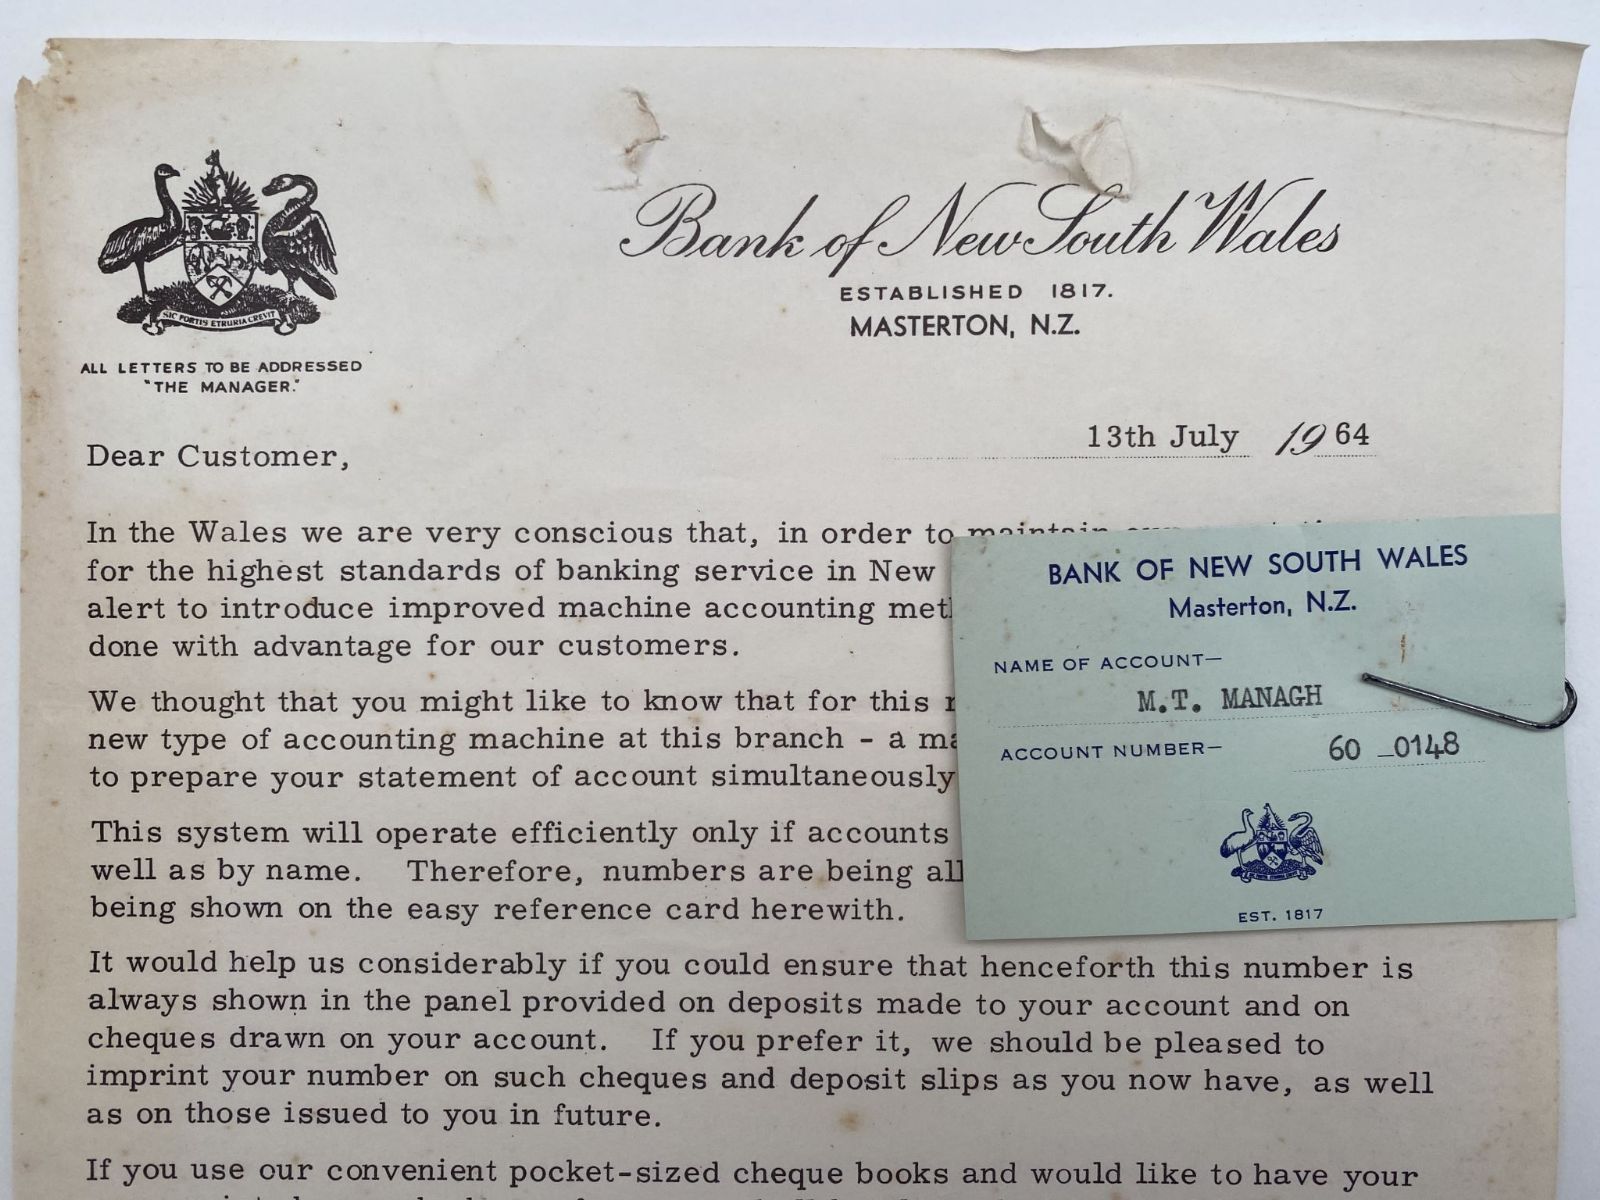 OLD LETTERHEAD: Bank of New South Wales, Masterton 1964